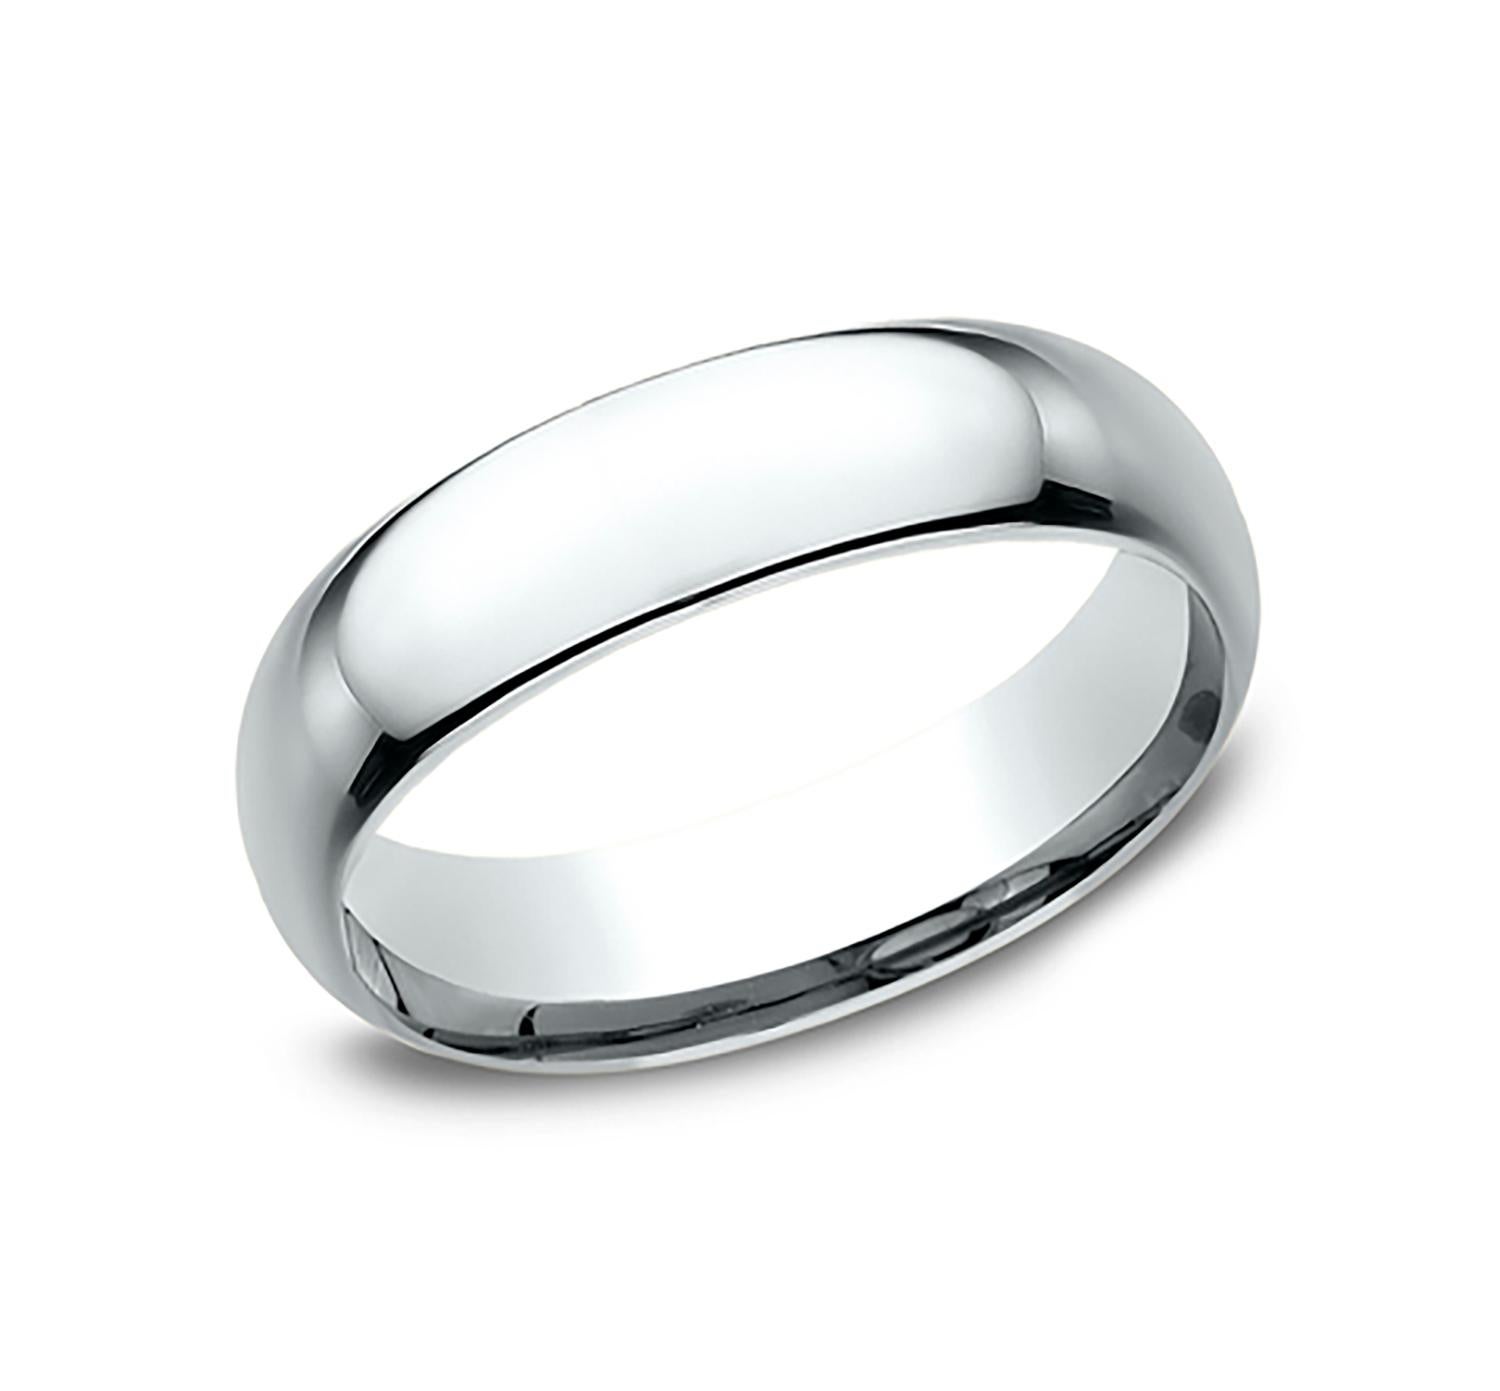 Benchmark wedding band in polished platinum finish. Width 6mm, high dome comfort fit. Custom engraving and finishing available. Size 11 US and resizable upon request. Available in 1/4, 1/2, and 3/4 sizes, for more information please message us on